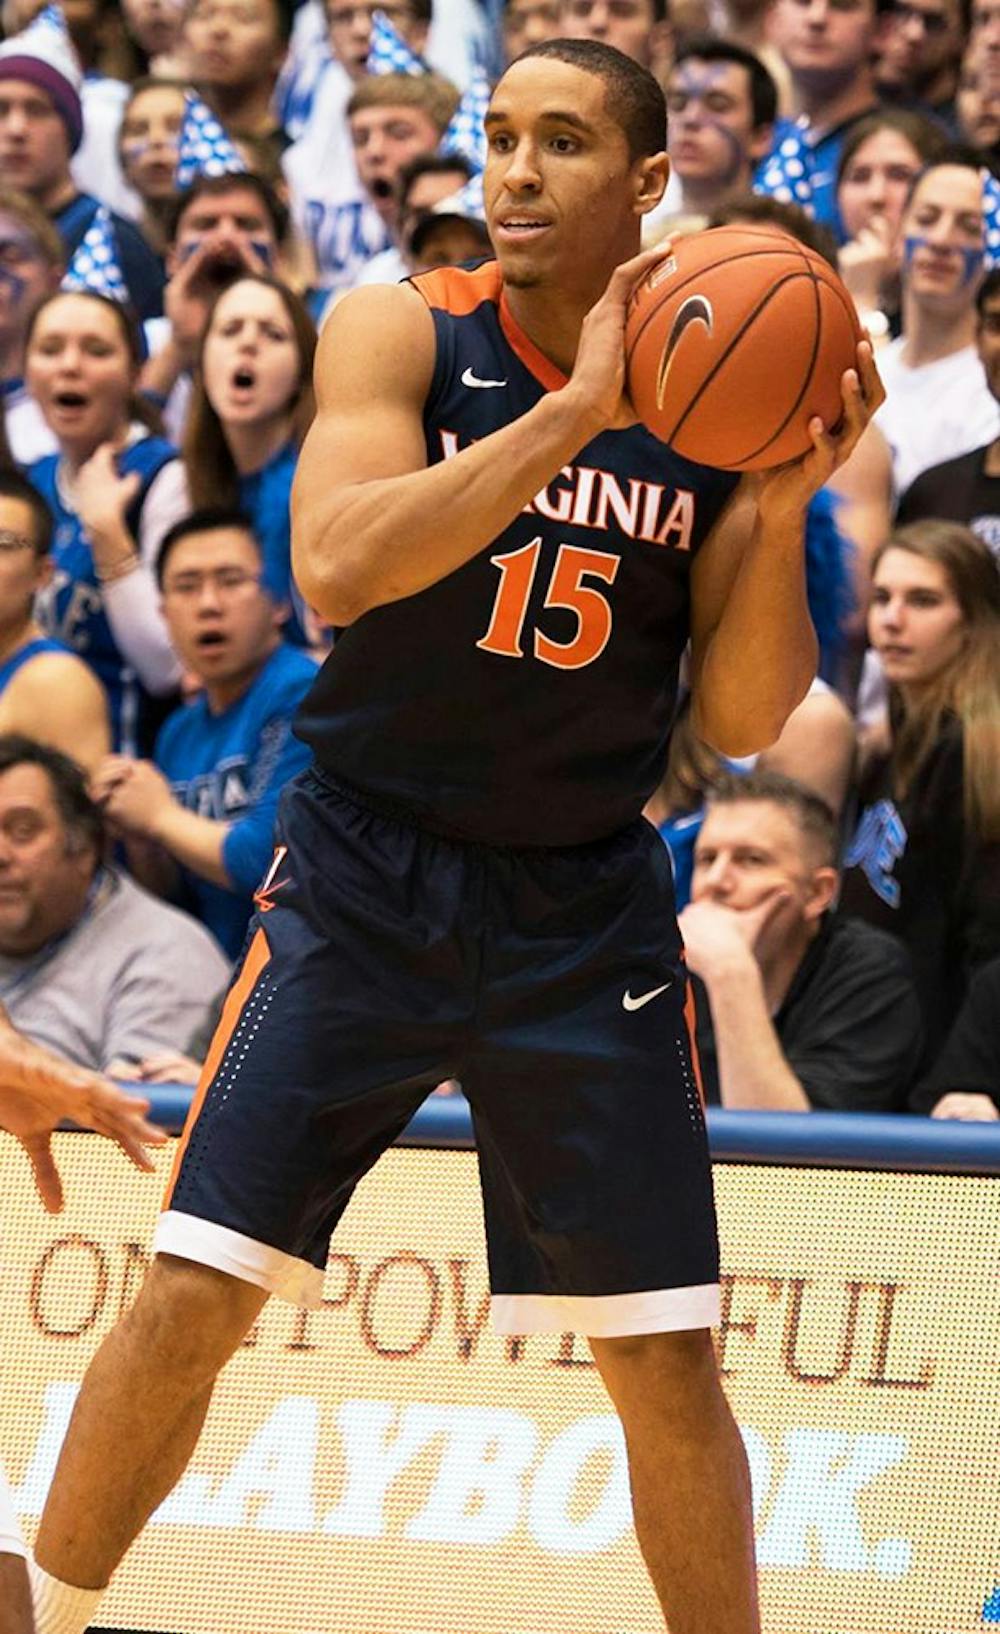 <p>Senior guard Malcolm Brogdon gave Virginia a 62-61 lead with 9.9 seconds left before Duke's Grayson Allen banked home a game-winner Saturday. Brogdon led the Cavaliers with 18 points.&nbsp;</p>